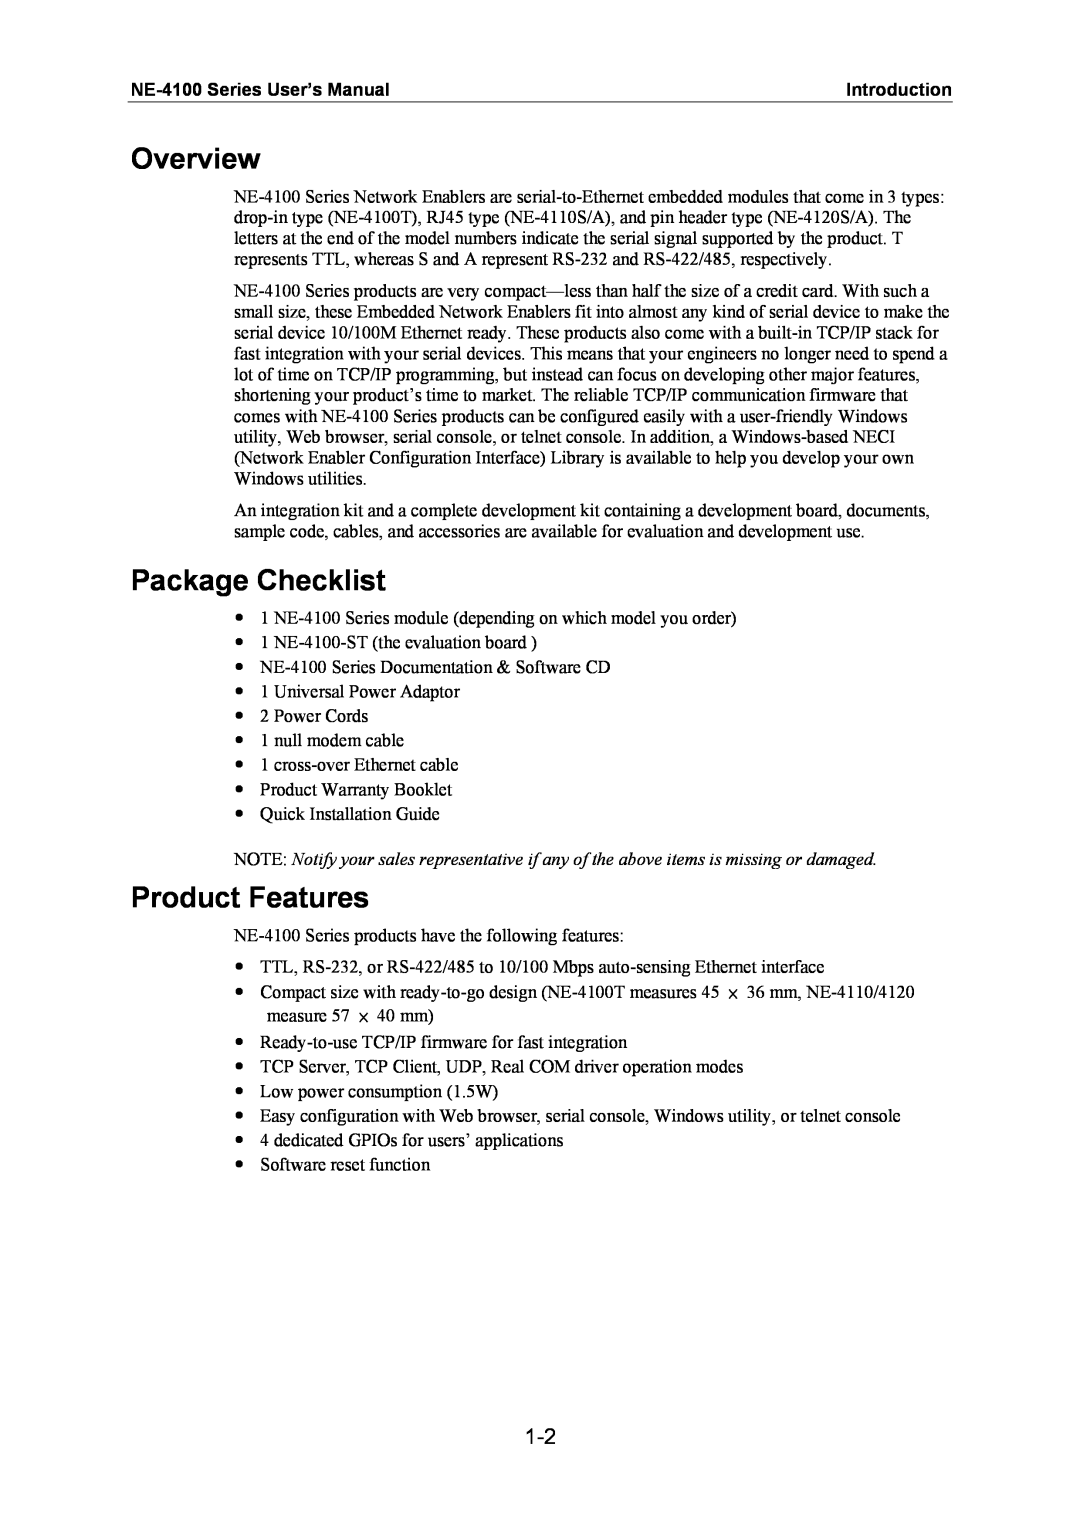 Moxa Technologies user manual Overview, Package Checklist, Product Features, NE-4100 Series User’s Manual, Introduction 